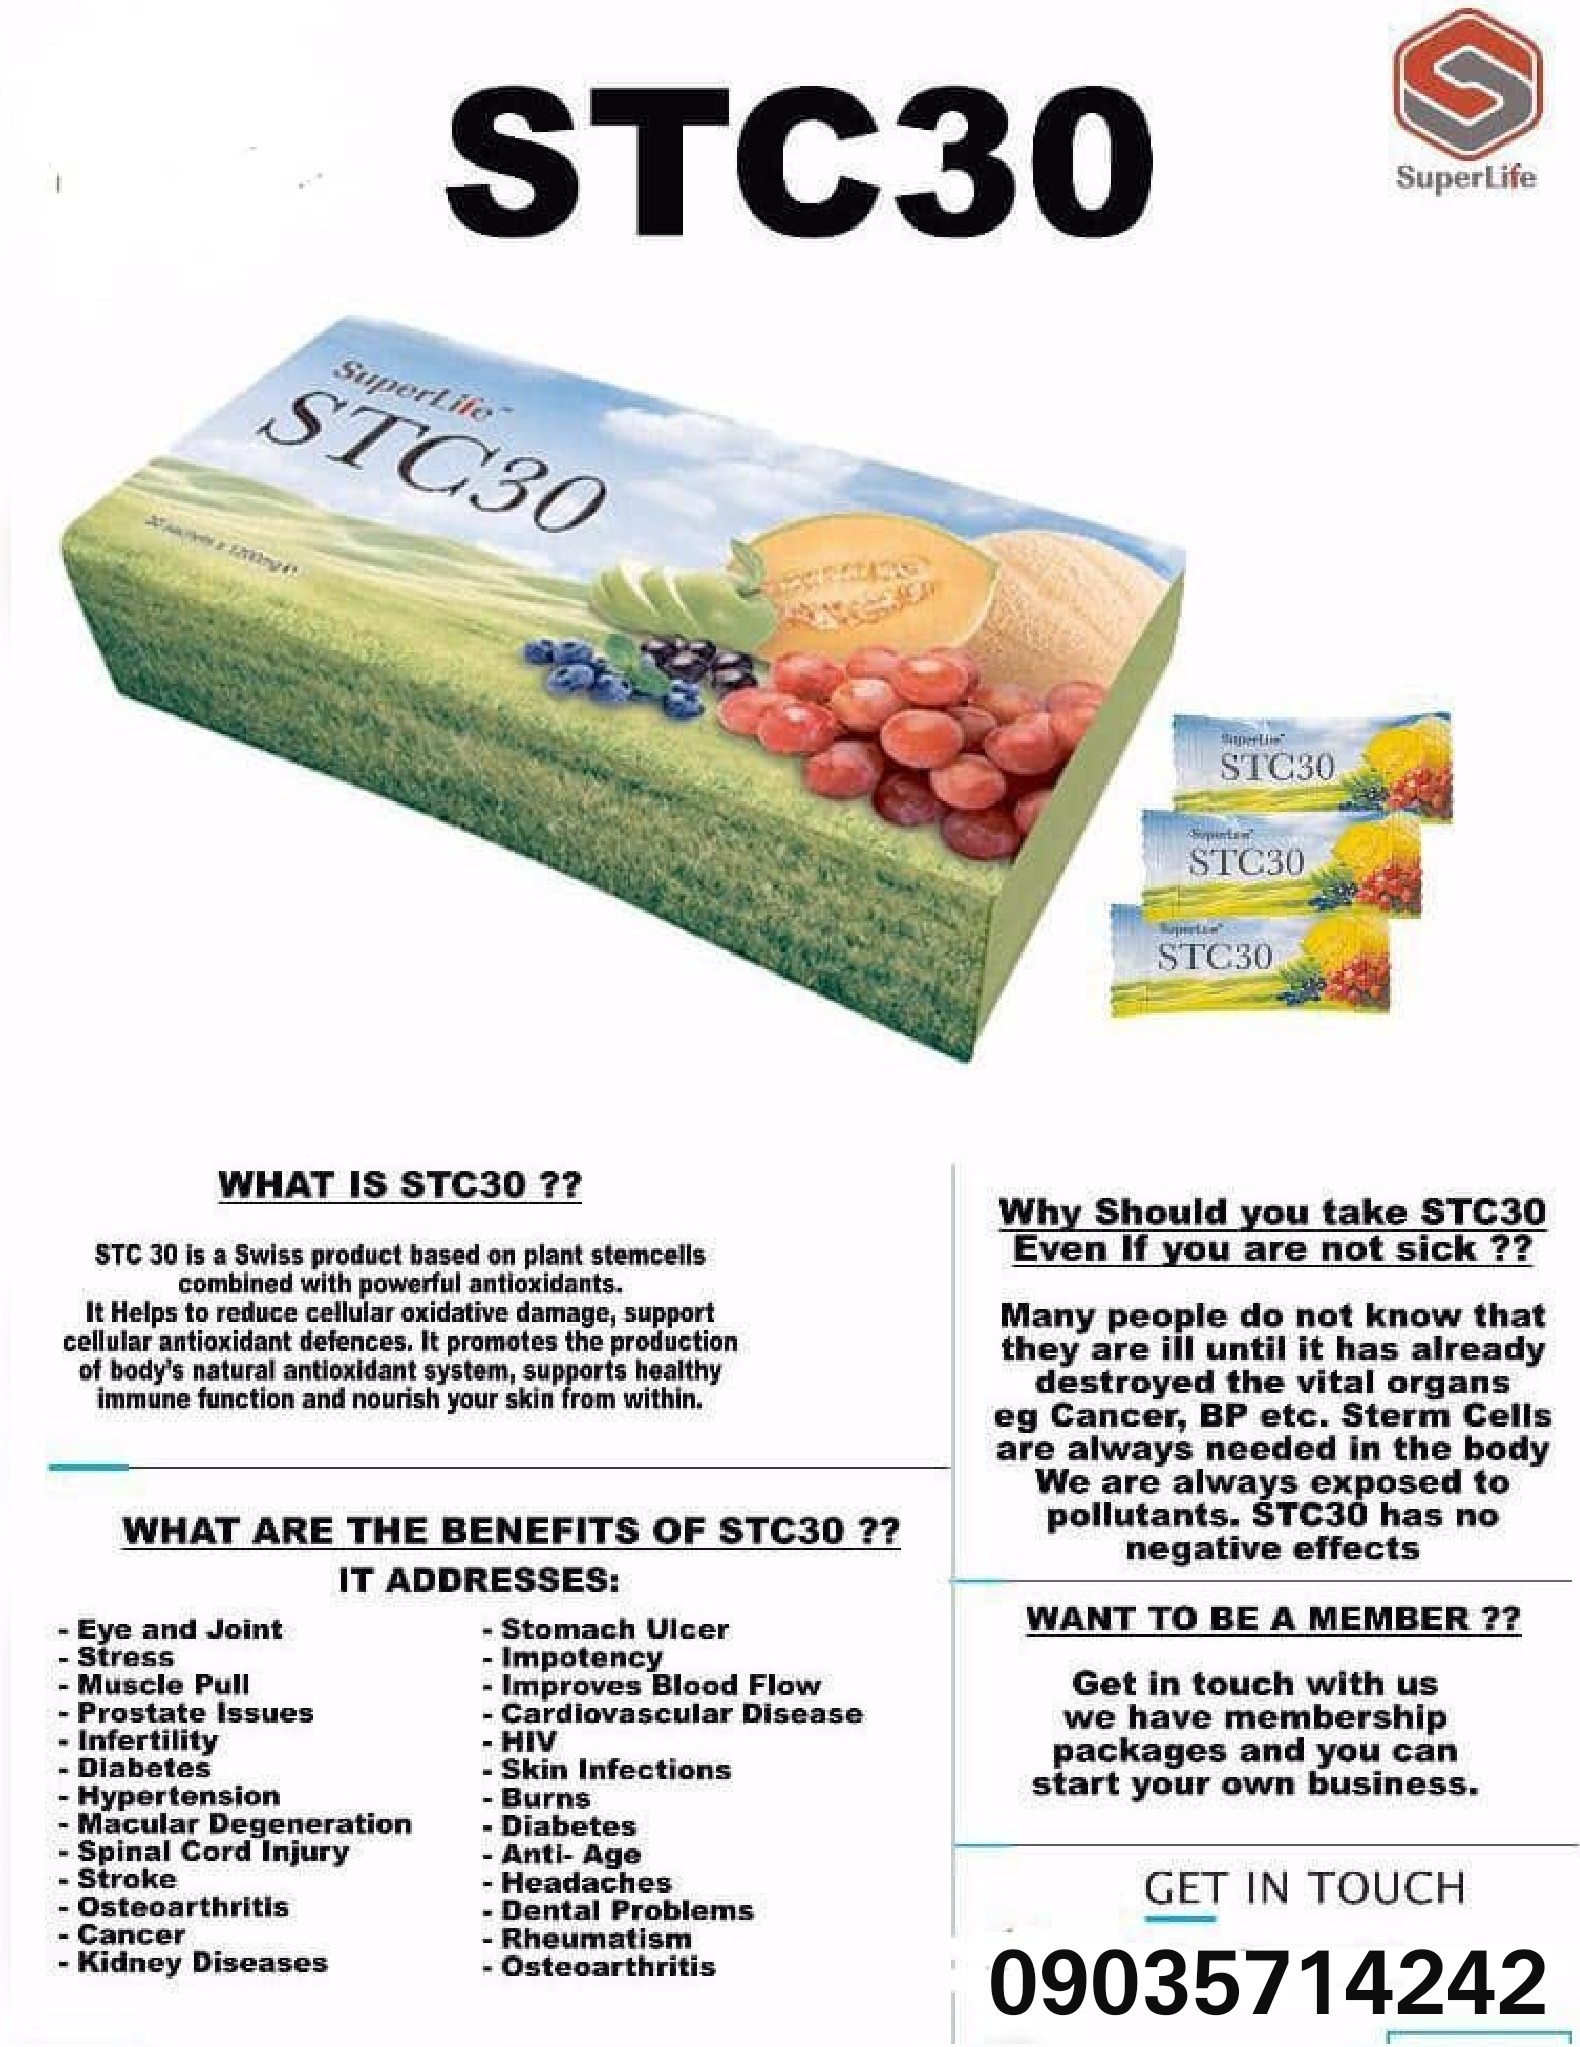 SuperLife STC30 Stem cell product cures